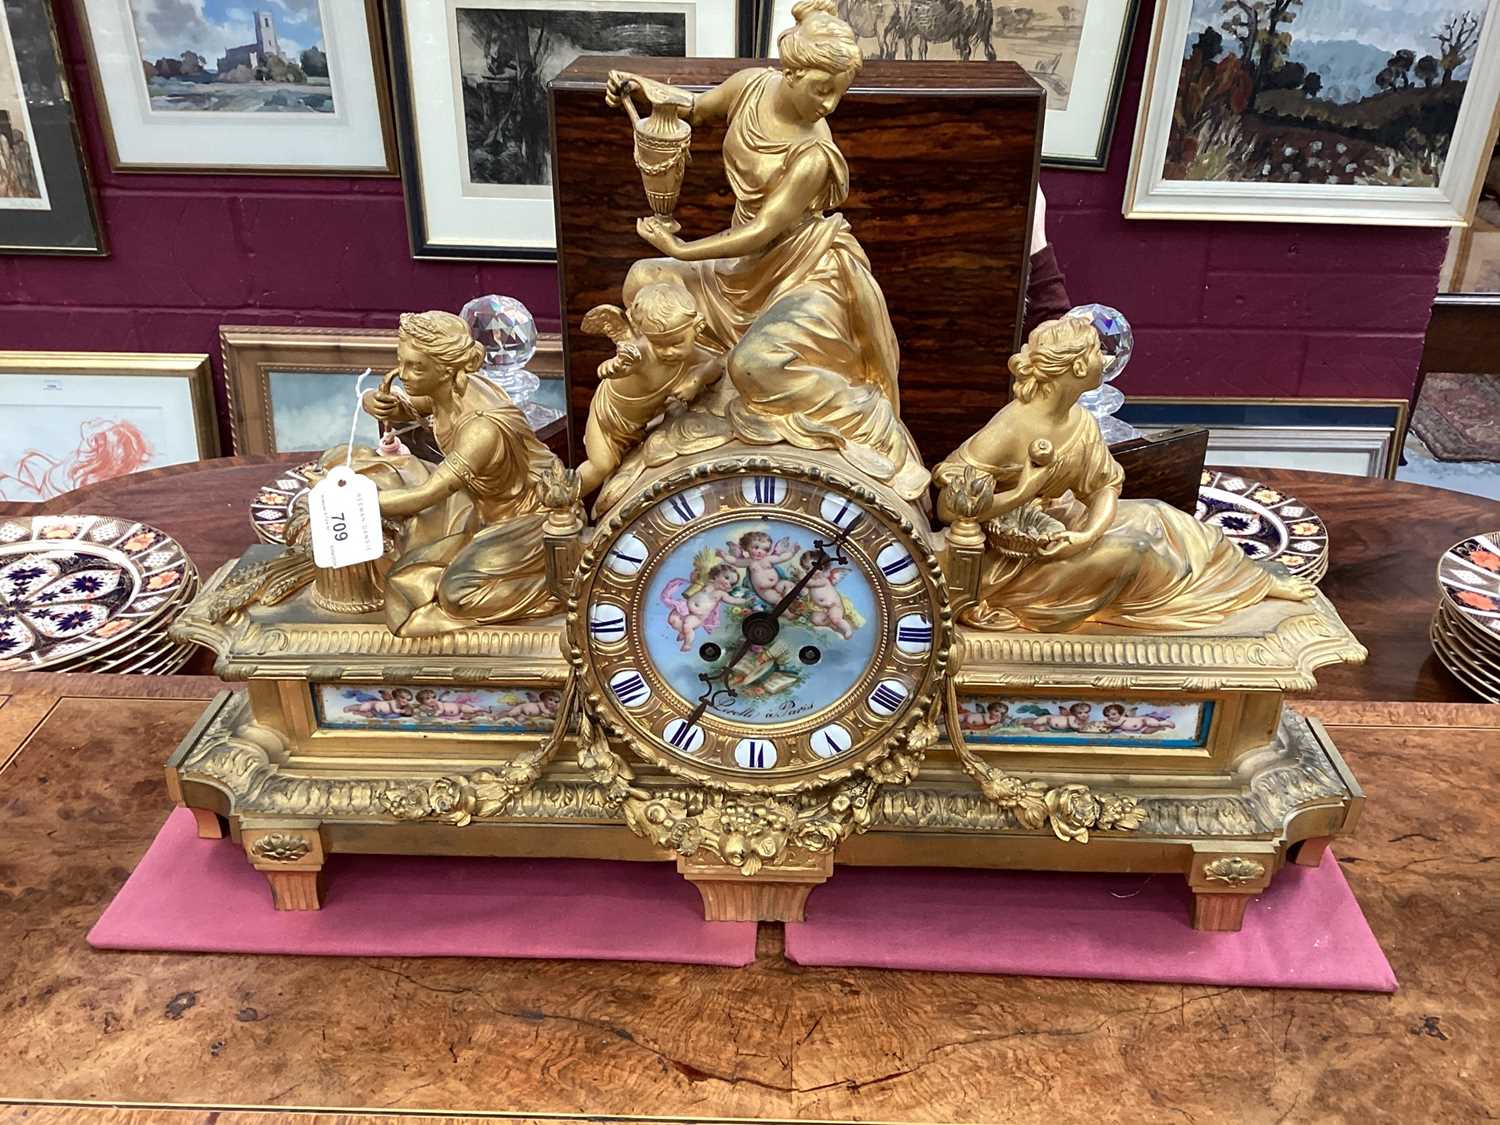 Fine quality large 19th century French ormolu clock garniture by Lerolle à Paris with Sèvres porcela - Image 2 of 26